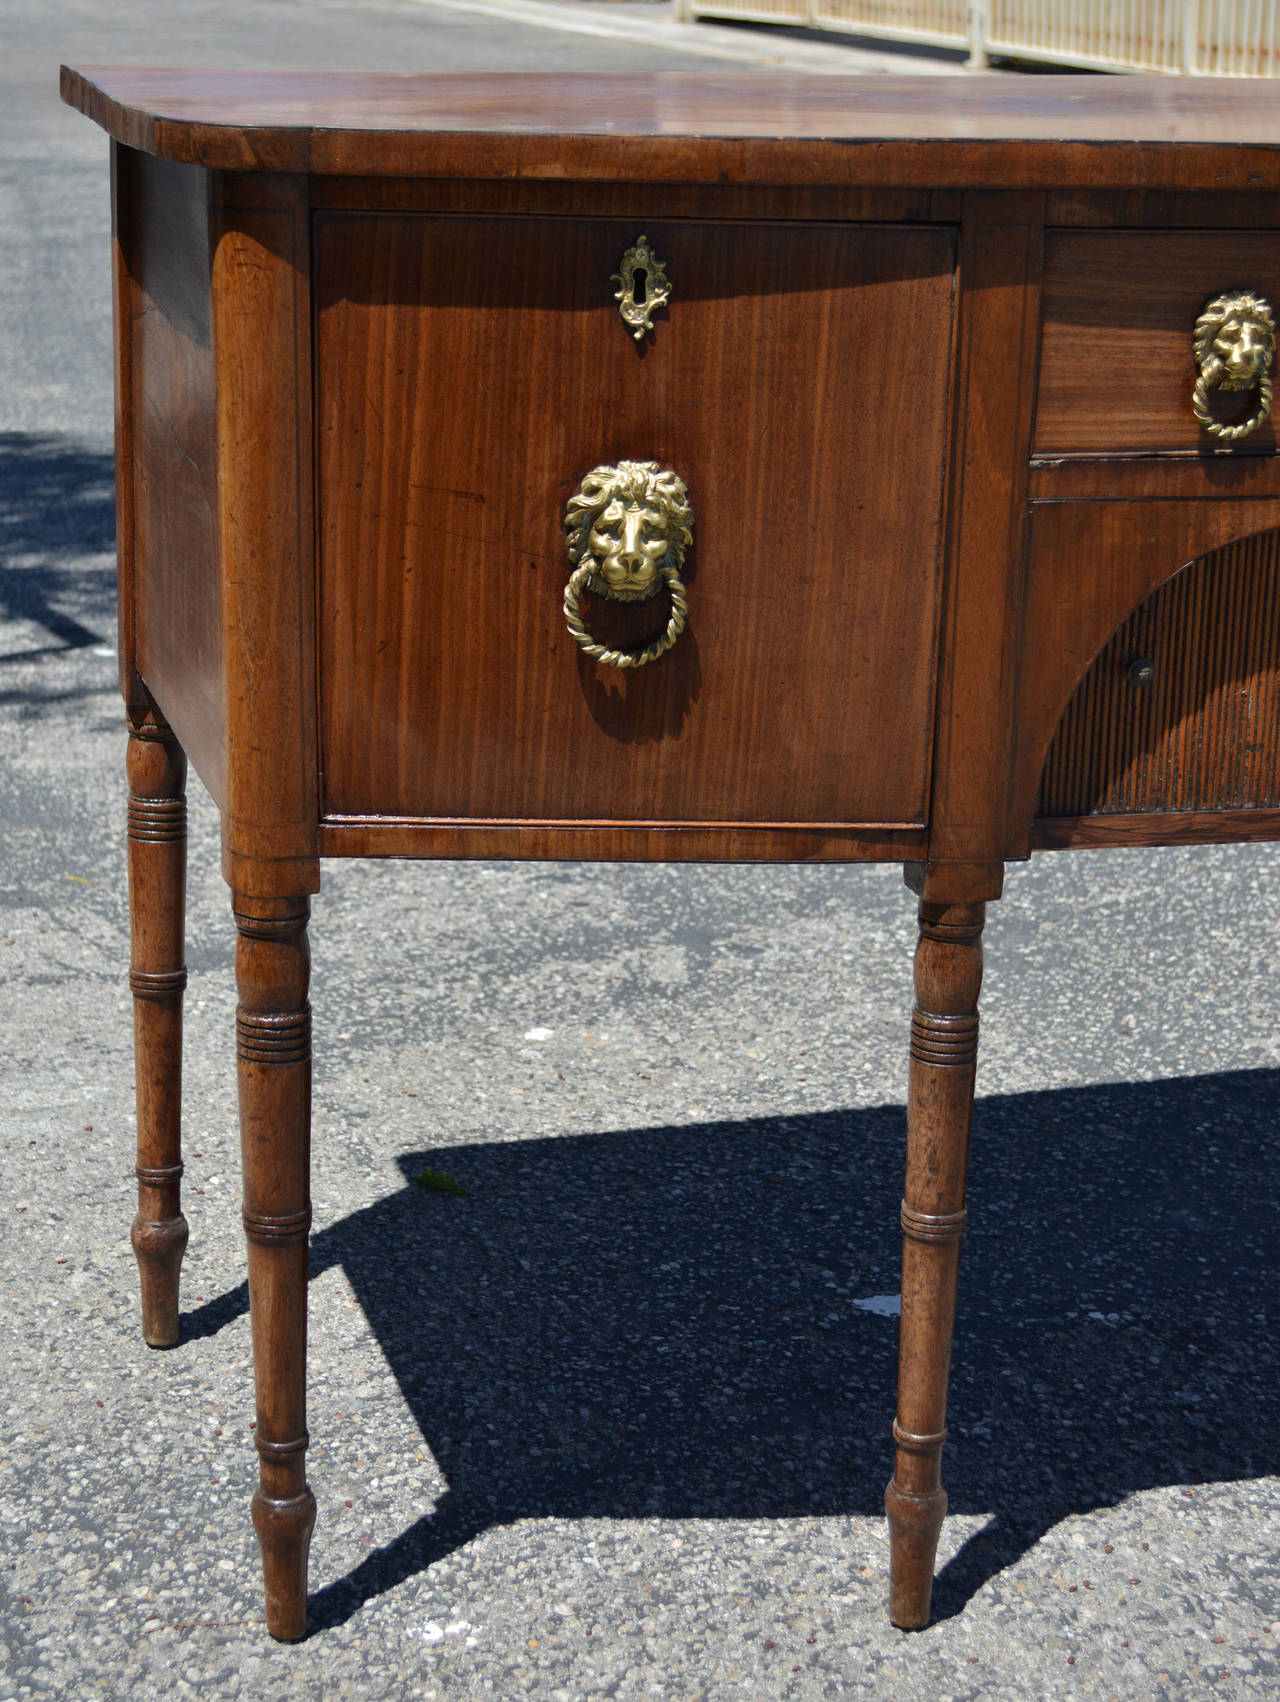 A lovely 19th century Regency bow front sideboard on turned legs with lion head brasses are with a central shallow drawer over a tambour door shelf, flanked by a deep drawer and cabinet. Good color and patina to the mahogany.